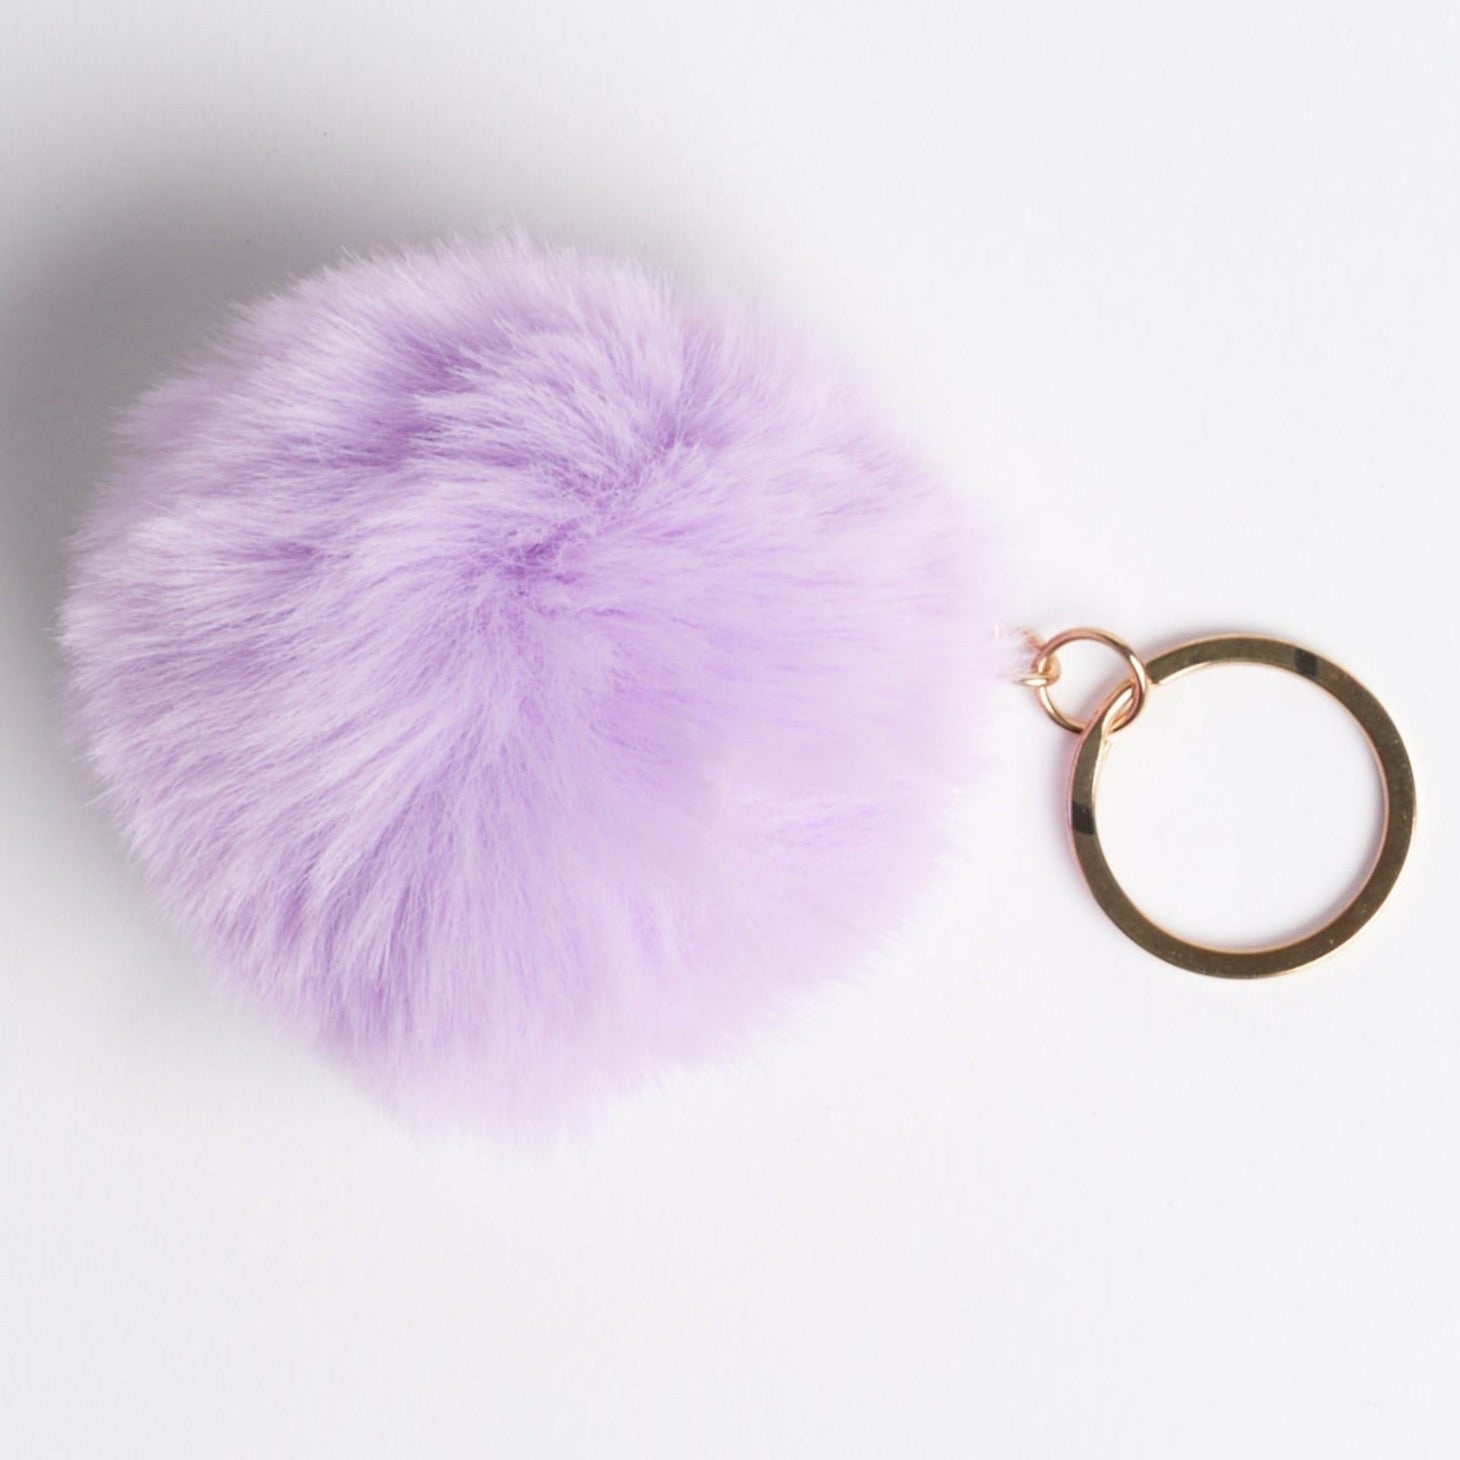 A lavender faux fur pom on a set of house keys. Photographed on a white background.